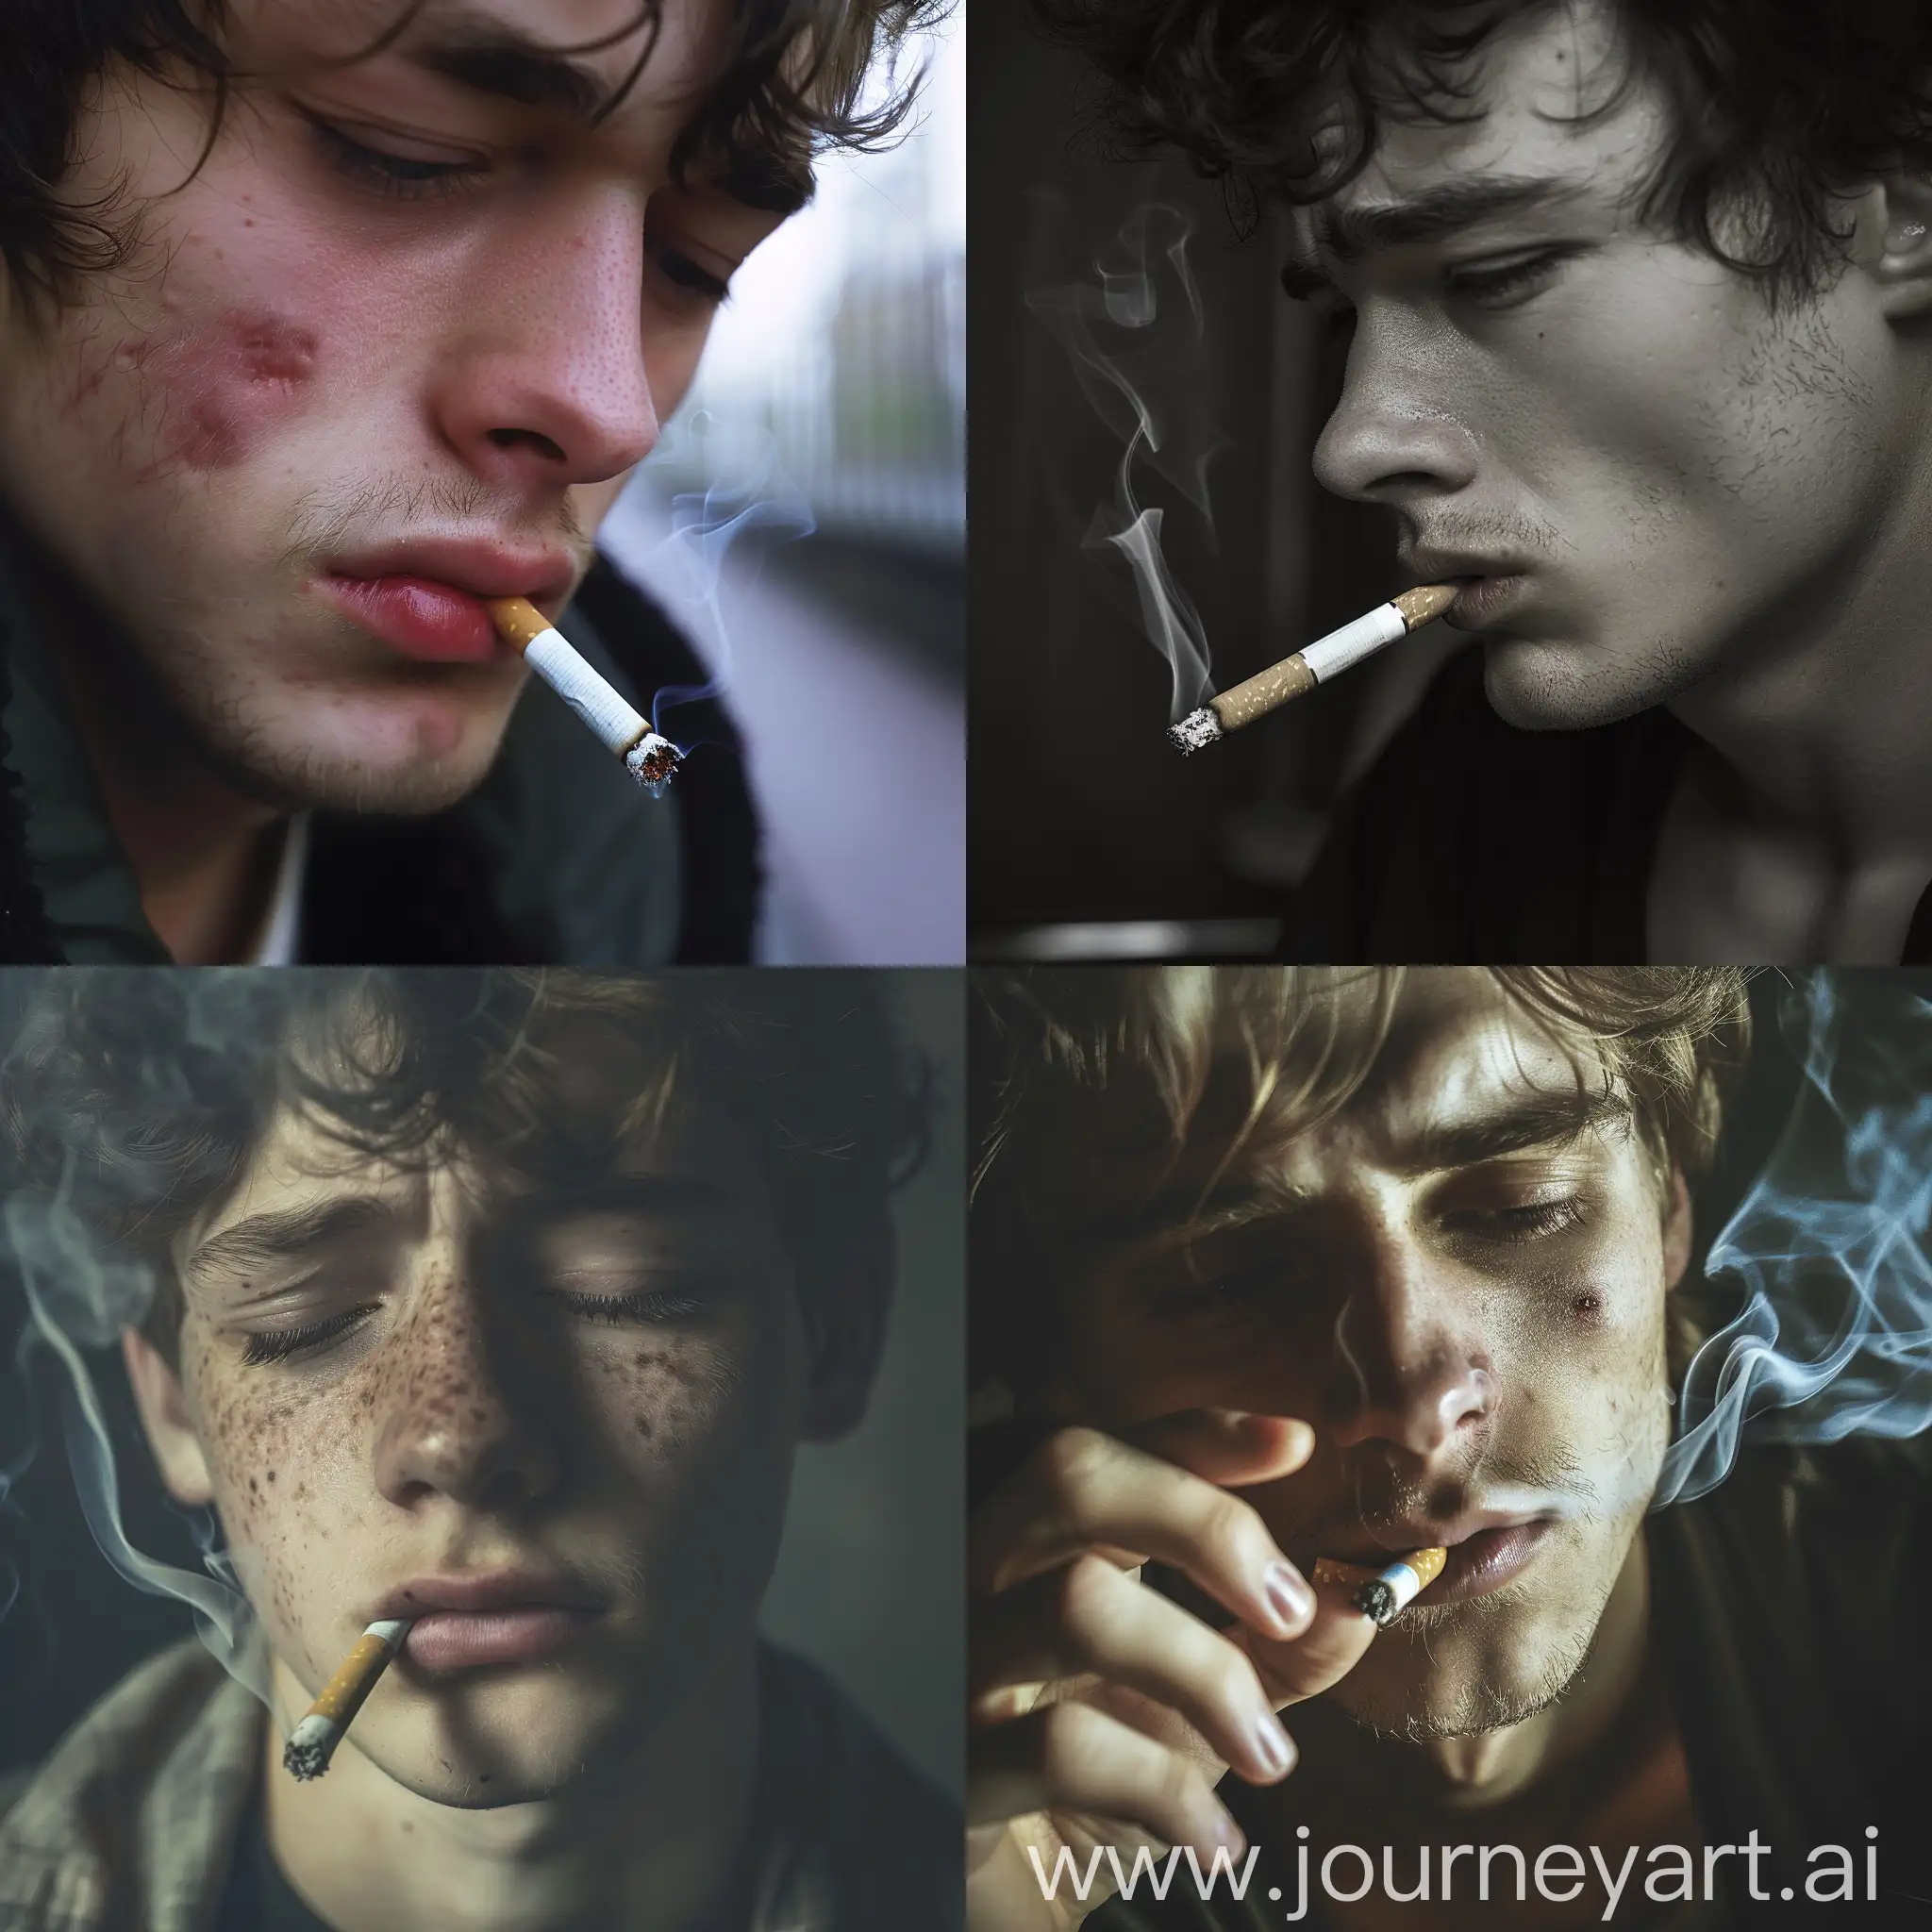 Lonely-Young-Man-Smoking-Cigarettes-in-Sorrowful-Contemplation